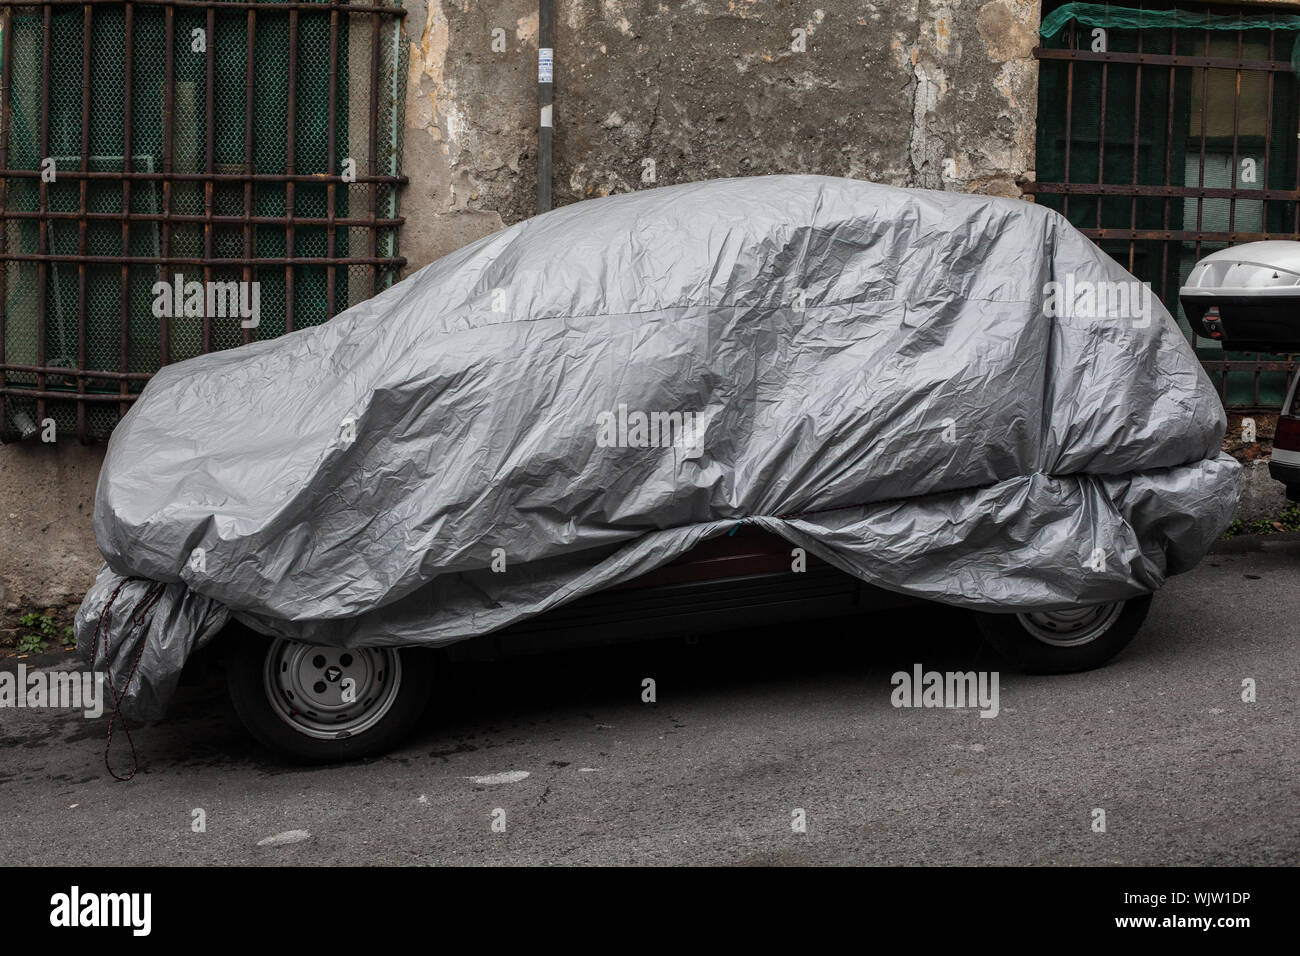 Car Tarpaulin Covered High Resolution Stock Photography and Images - Alamy